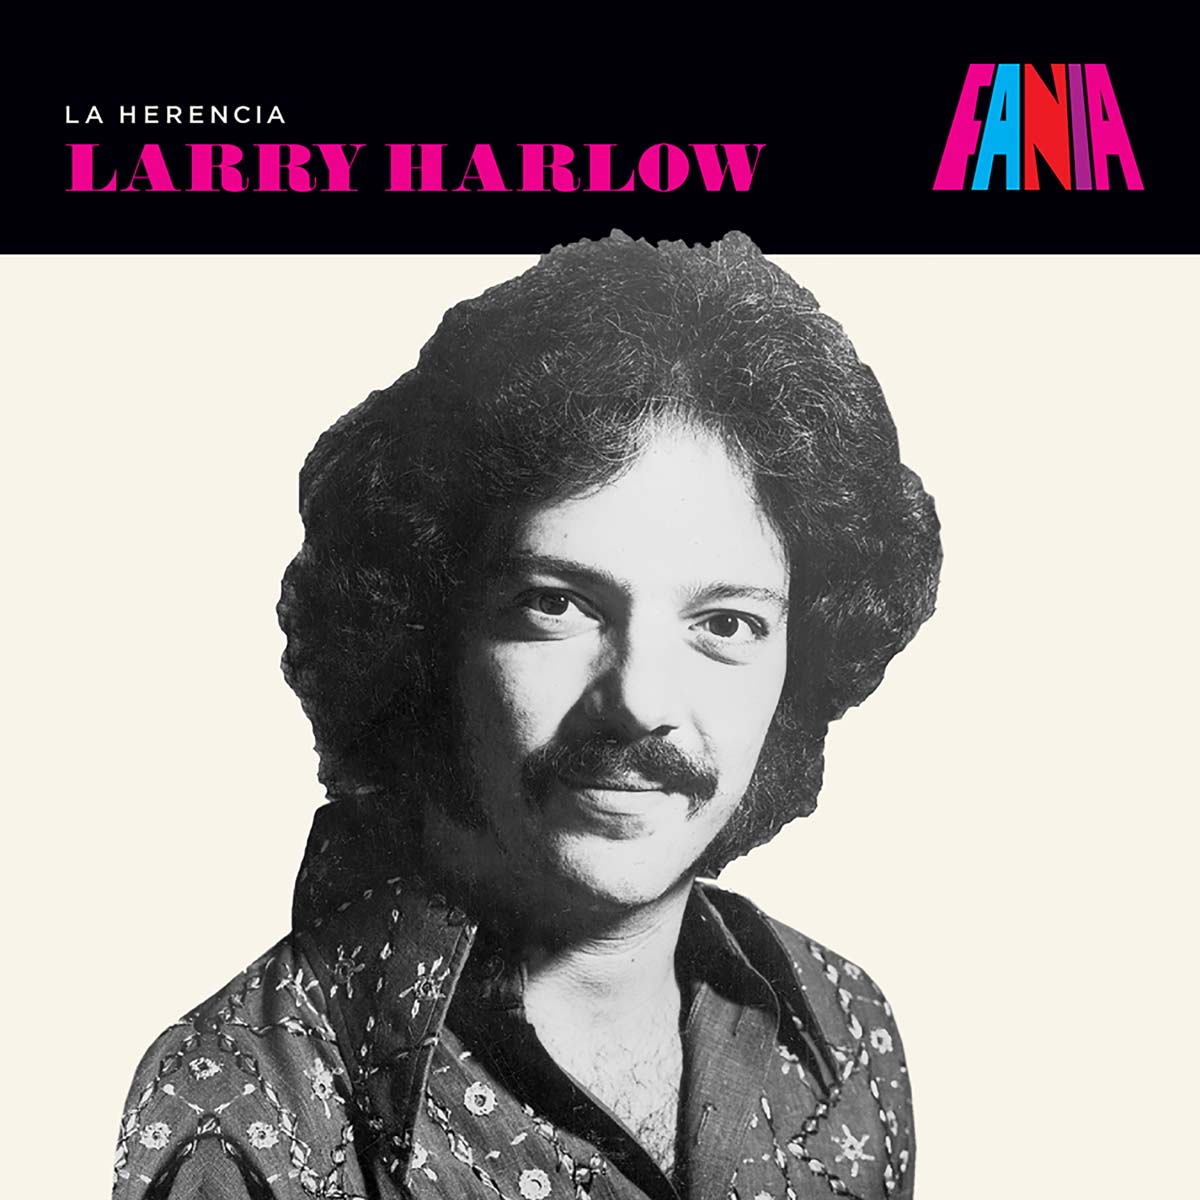 Featured Image for “LARRY HARLOW  LA HERENCIA”